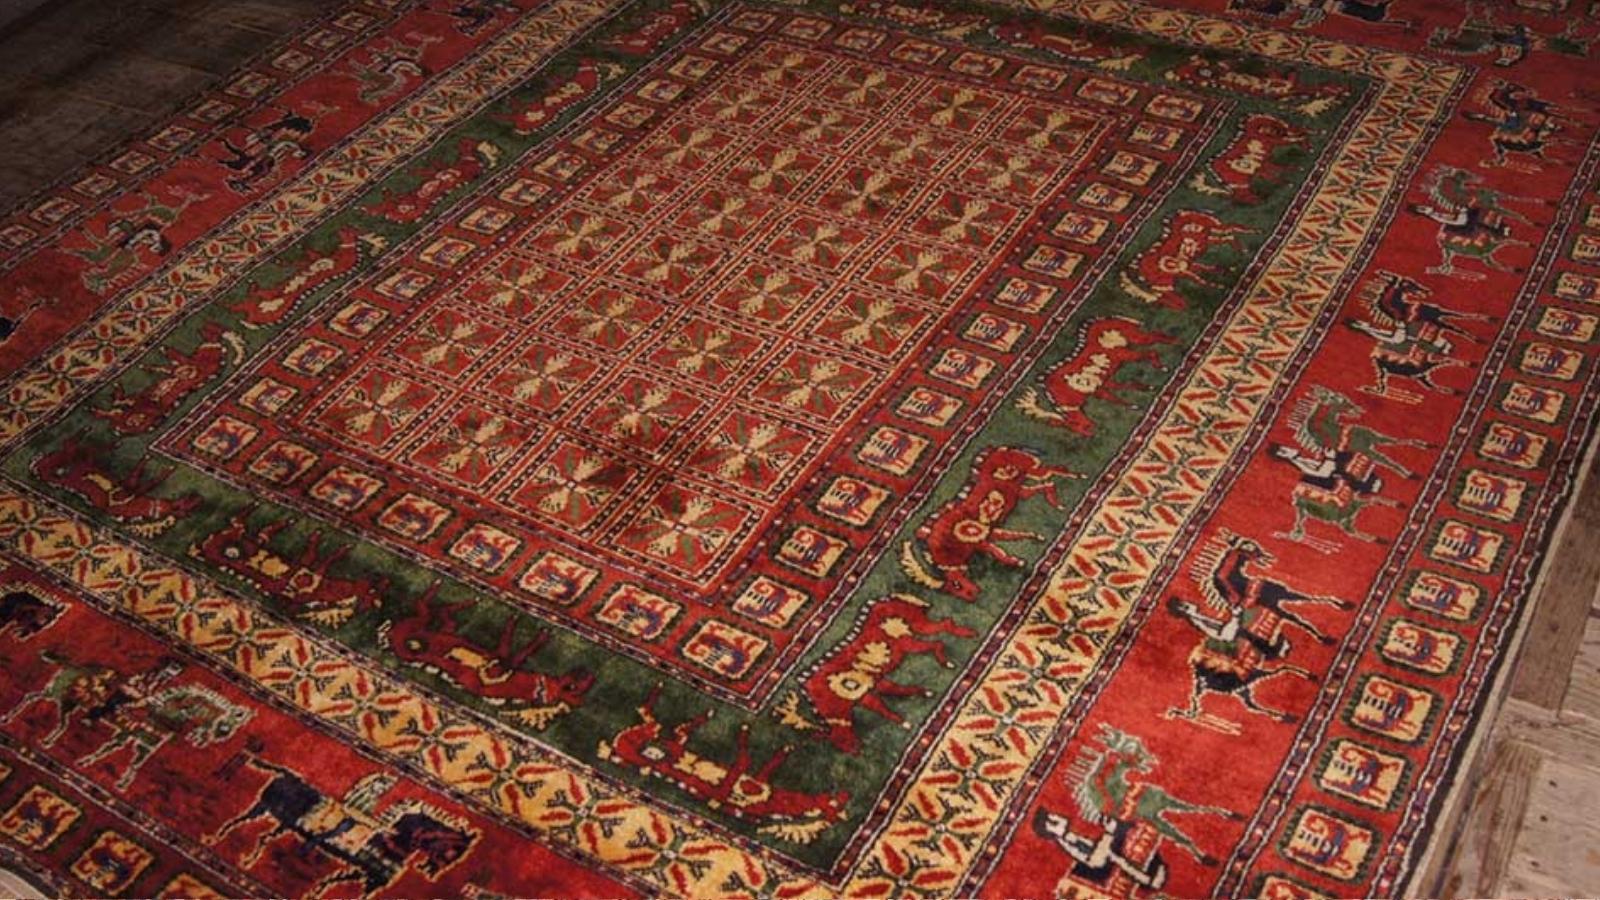 Discovering the World's Oldest Carpet | My Dream Rug